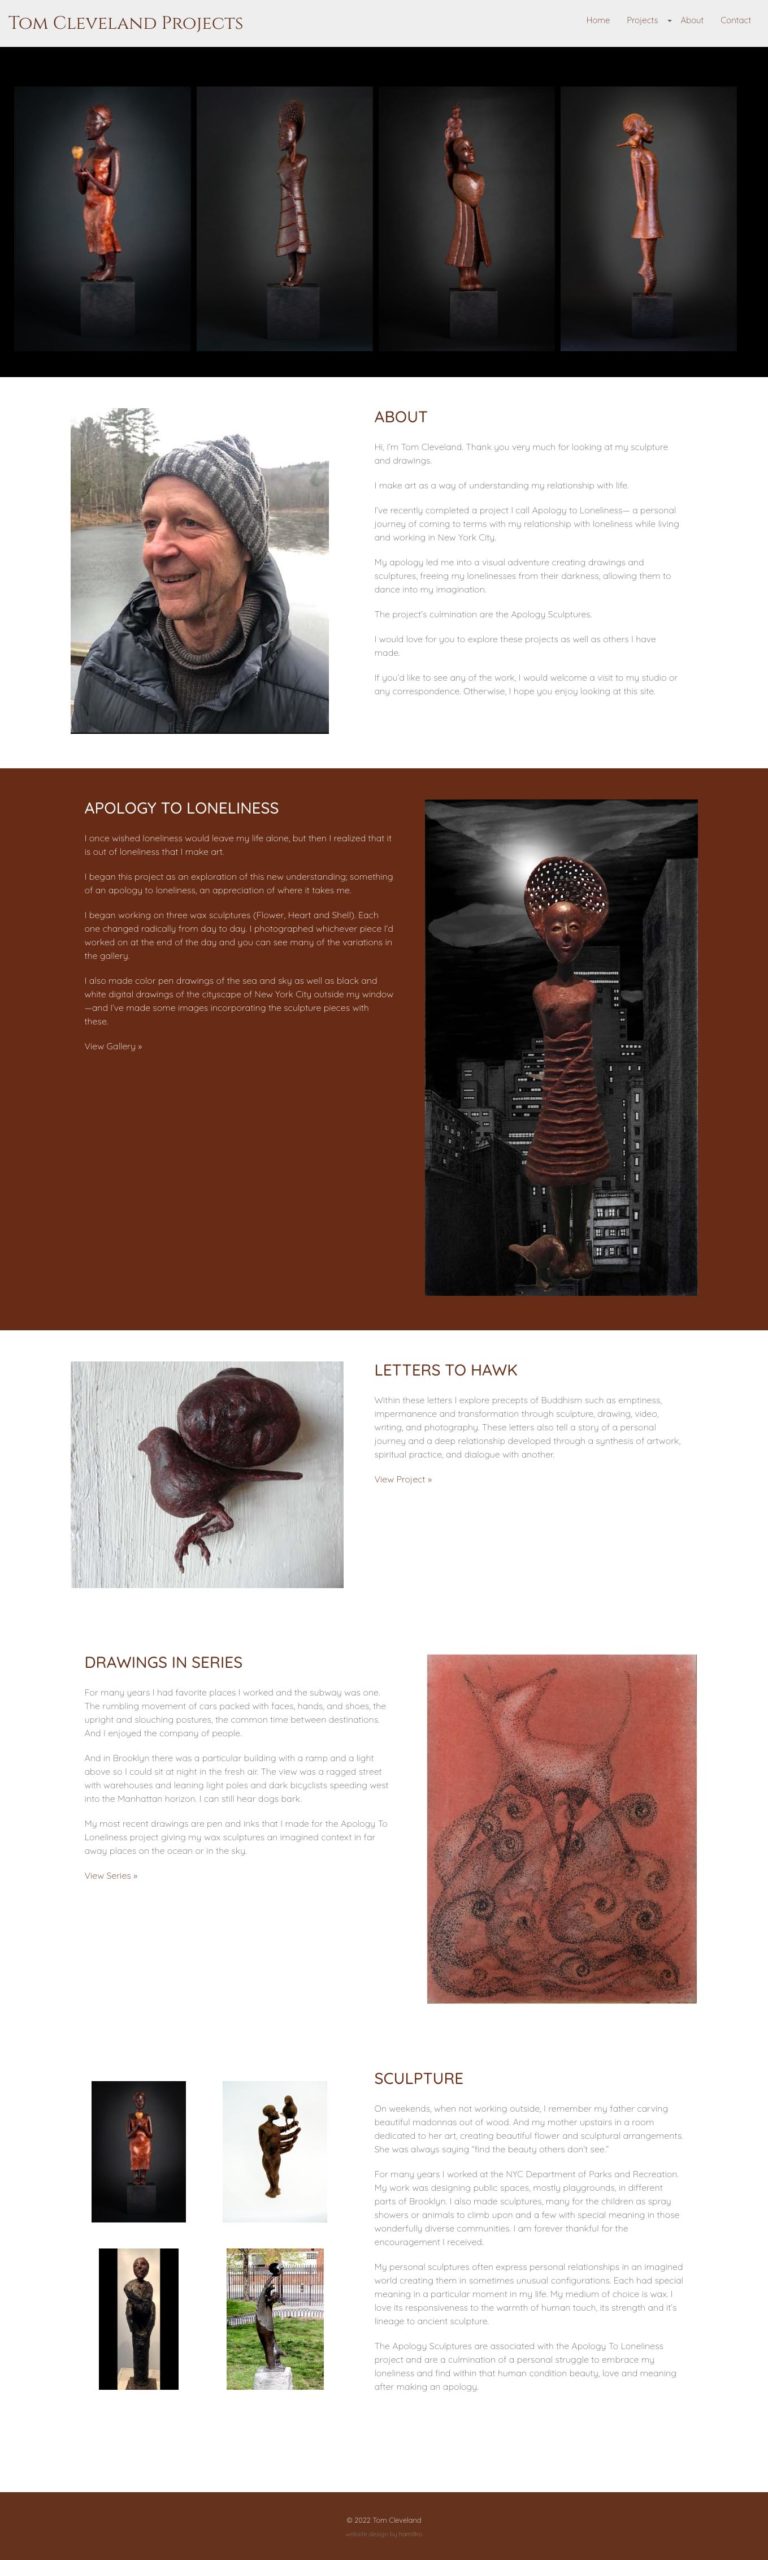 Website design for a New York artist. Teh long-scrolling homepage features four of the artis's sculpture in the banner section, followed by an introduction tot he artist (image + description), then a sections on special art projects and series.